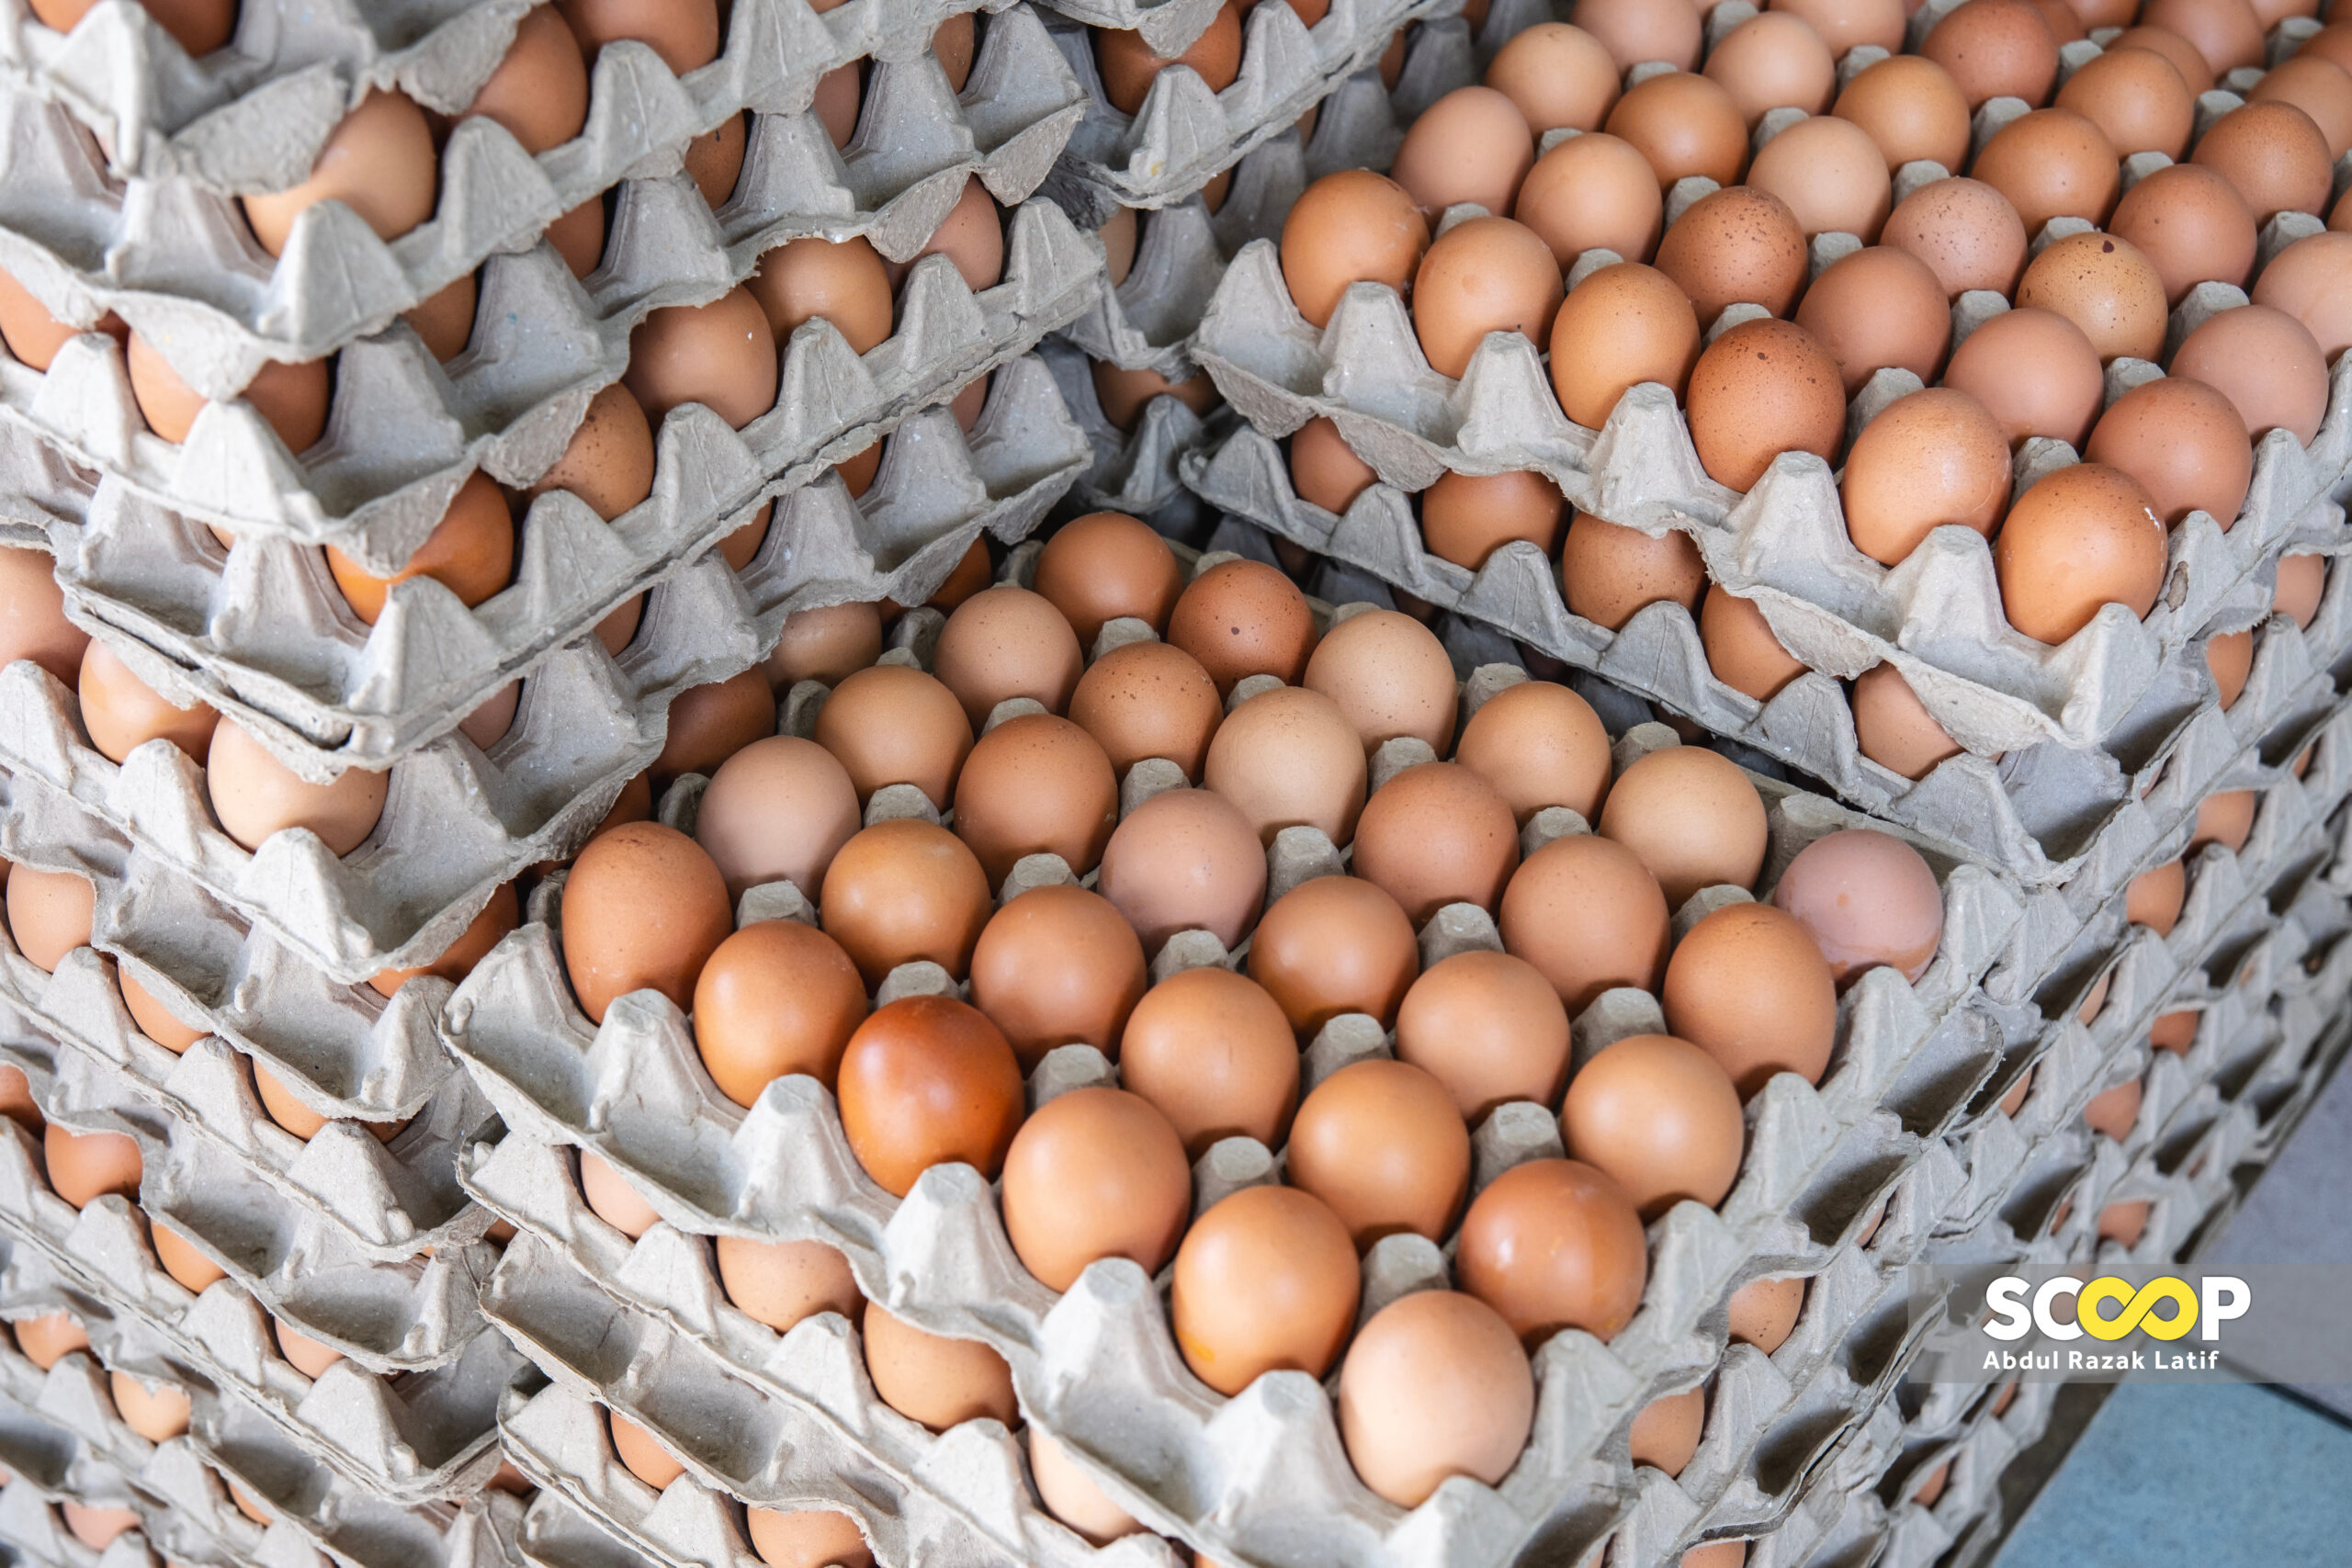 Egg price cut fails to lower food costs in Sabah